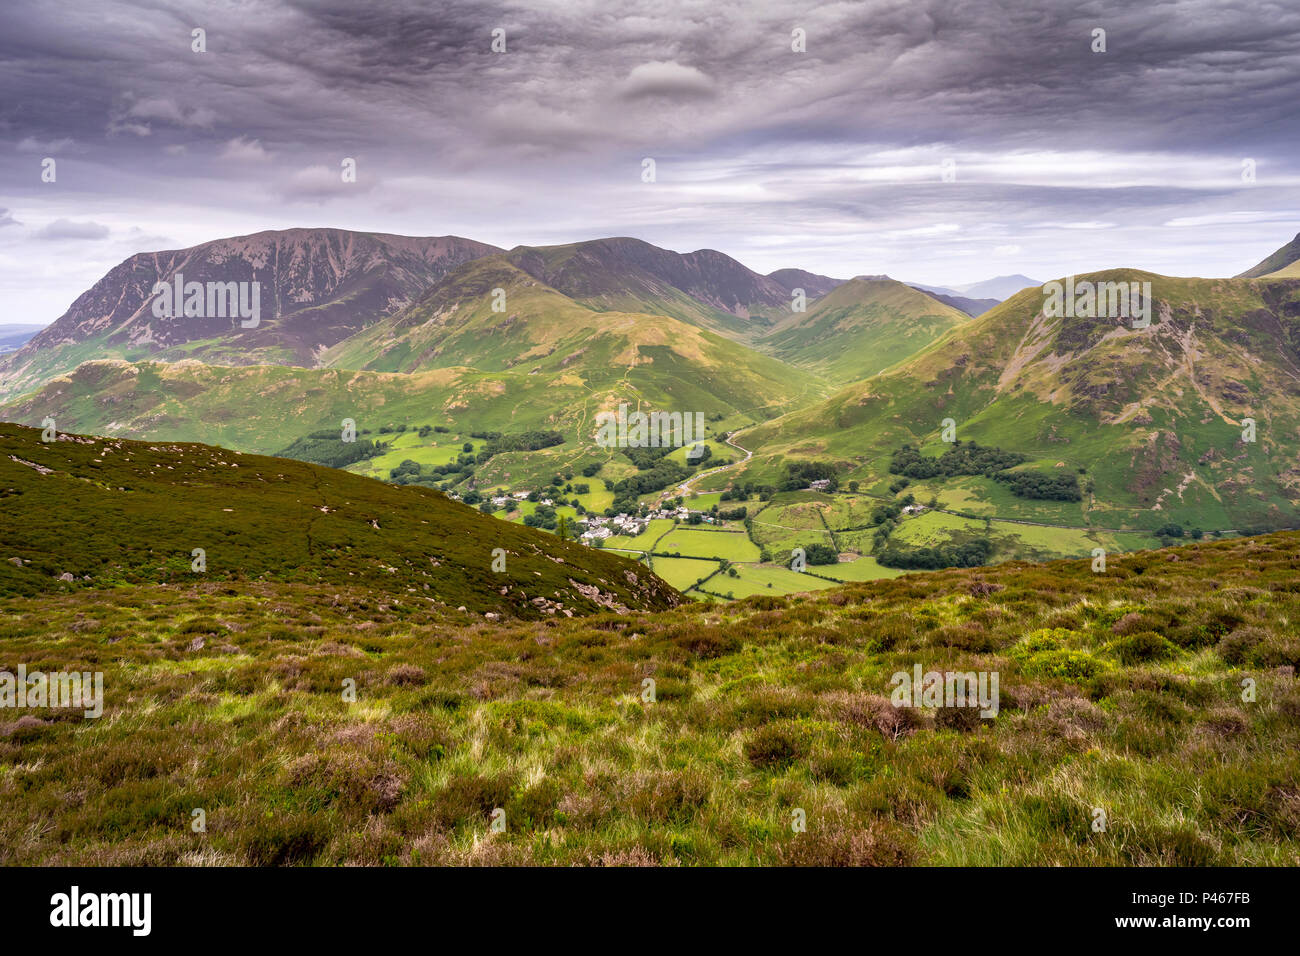 Cumbrian Mountains oben Buttermere, Lake District. Stockfoto